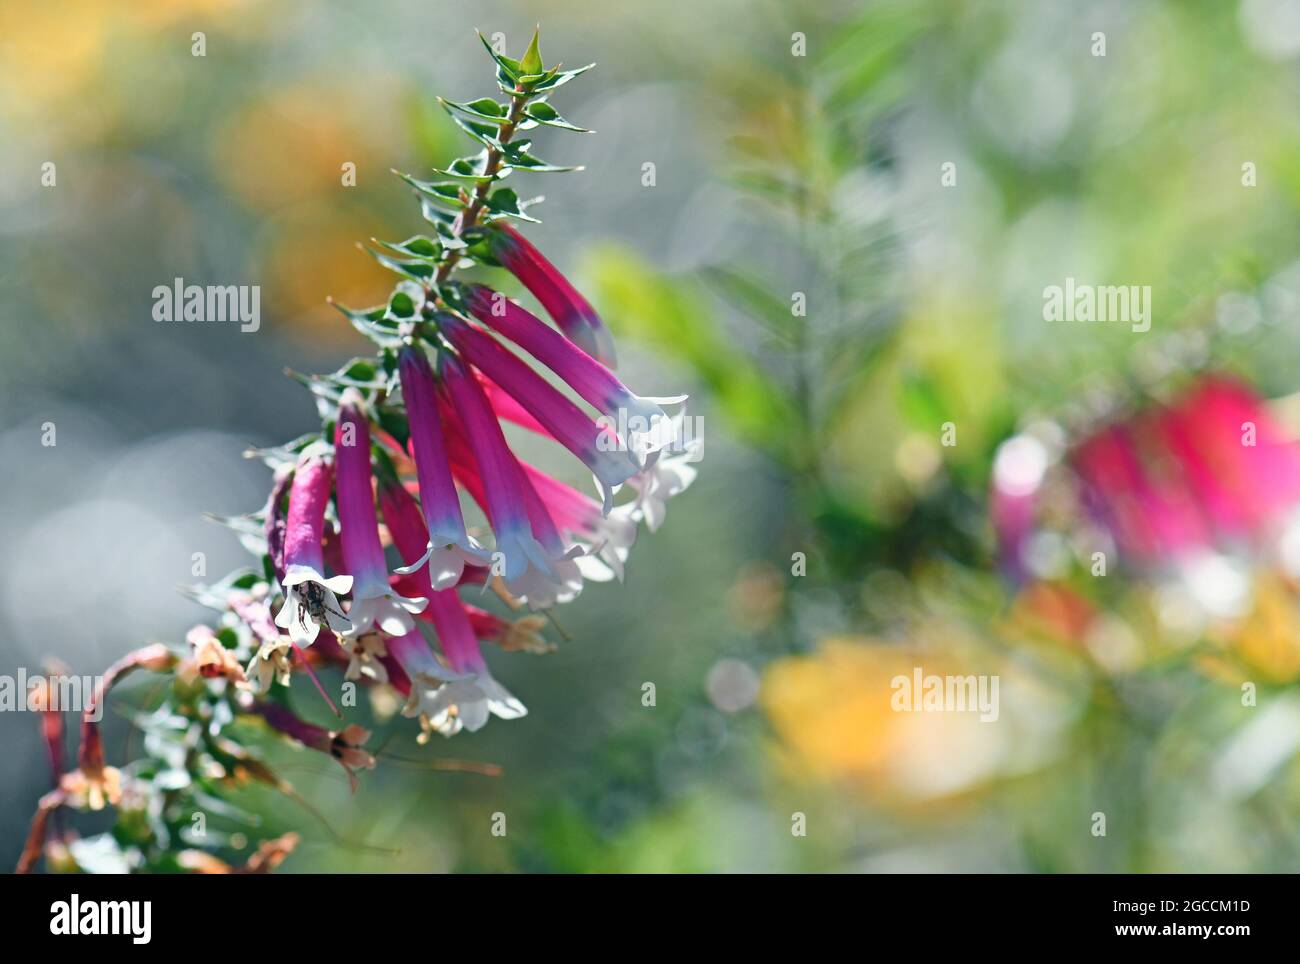 Wildflower background of back lit pink, red and white bell-shaped flowers of the Australian Fuchsia Heath, Epacris longiflora, family Ericaceae Stock Photo